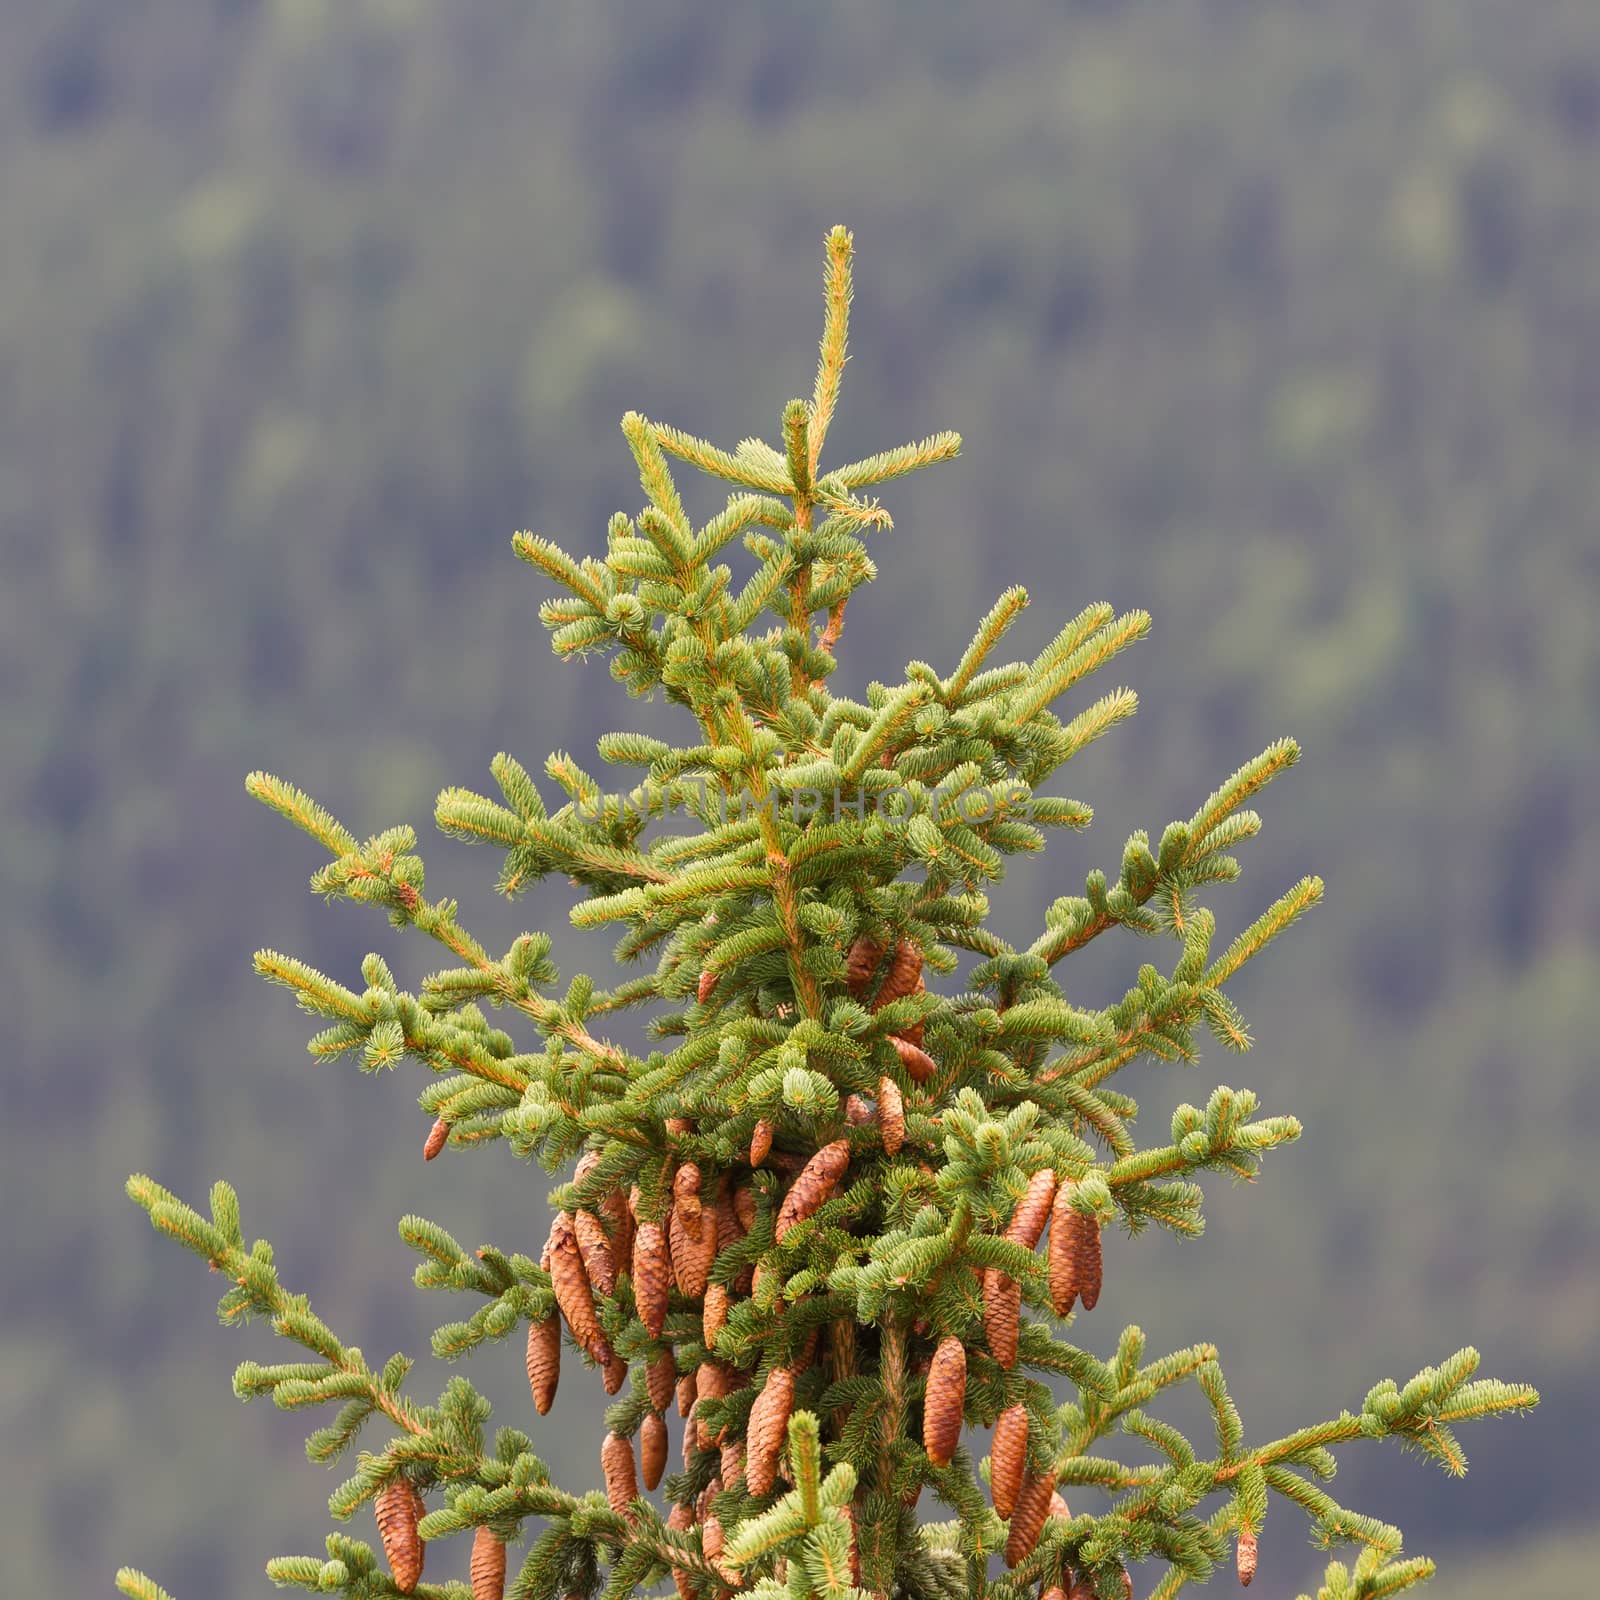 Cones on a pine branch by michaklootwijk